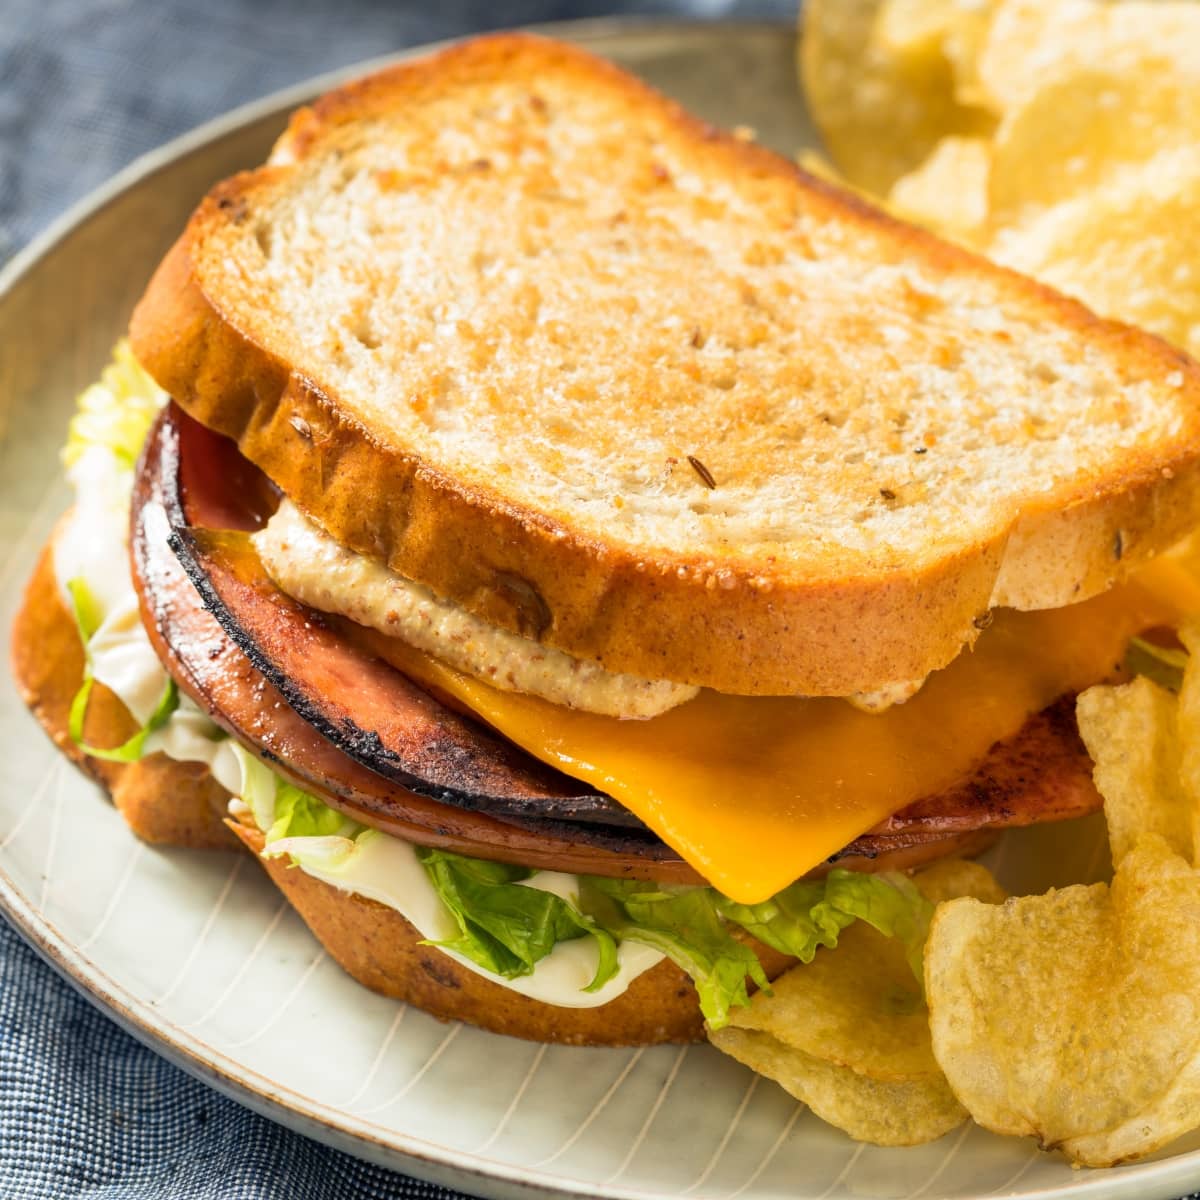 Homemade Fried Bologna Sandwich with Bread, Cheese and Chips